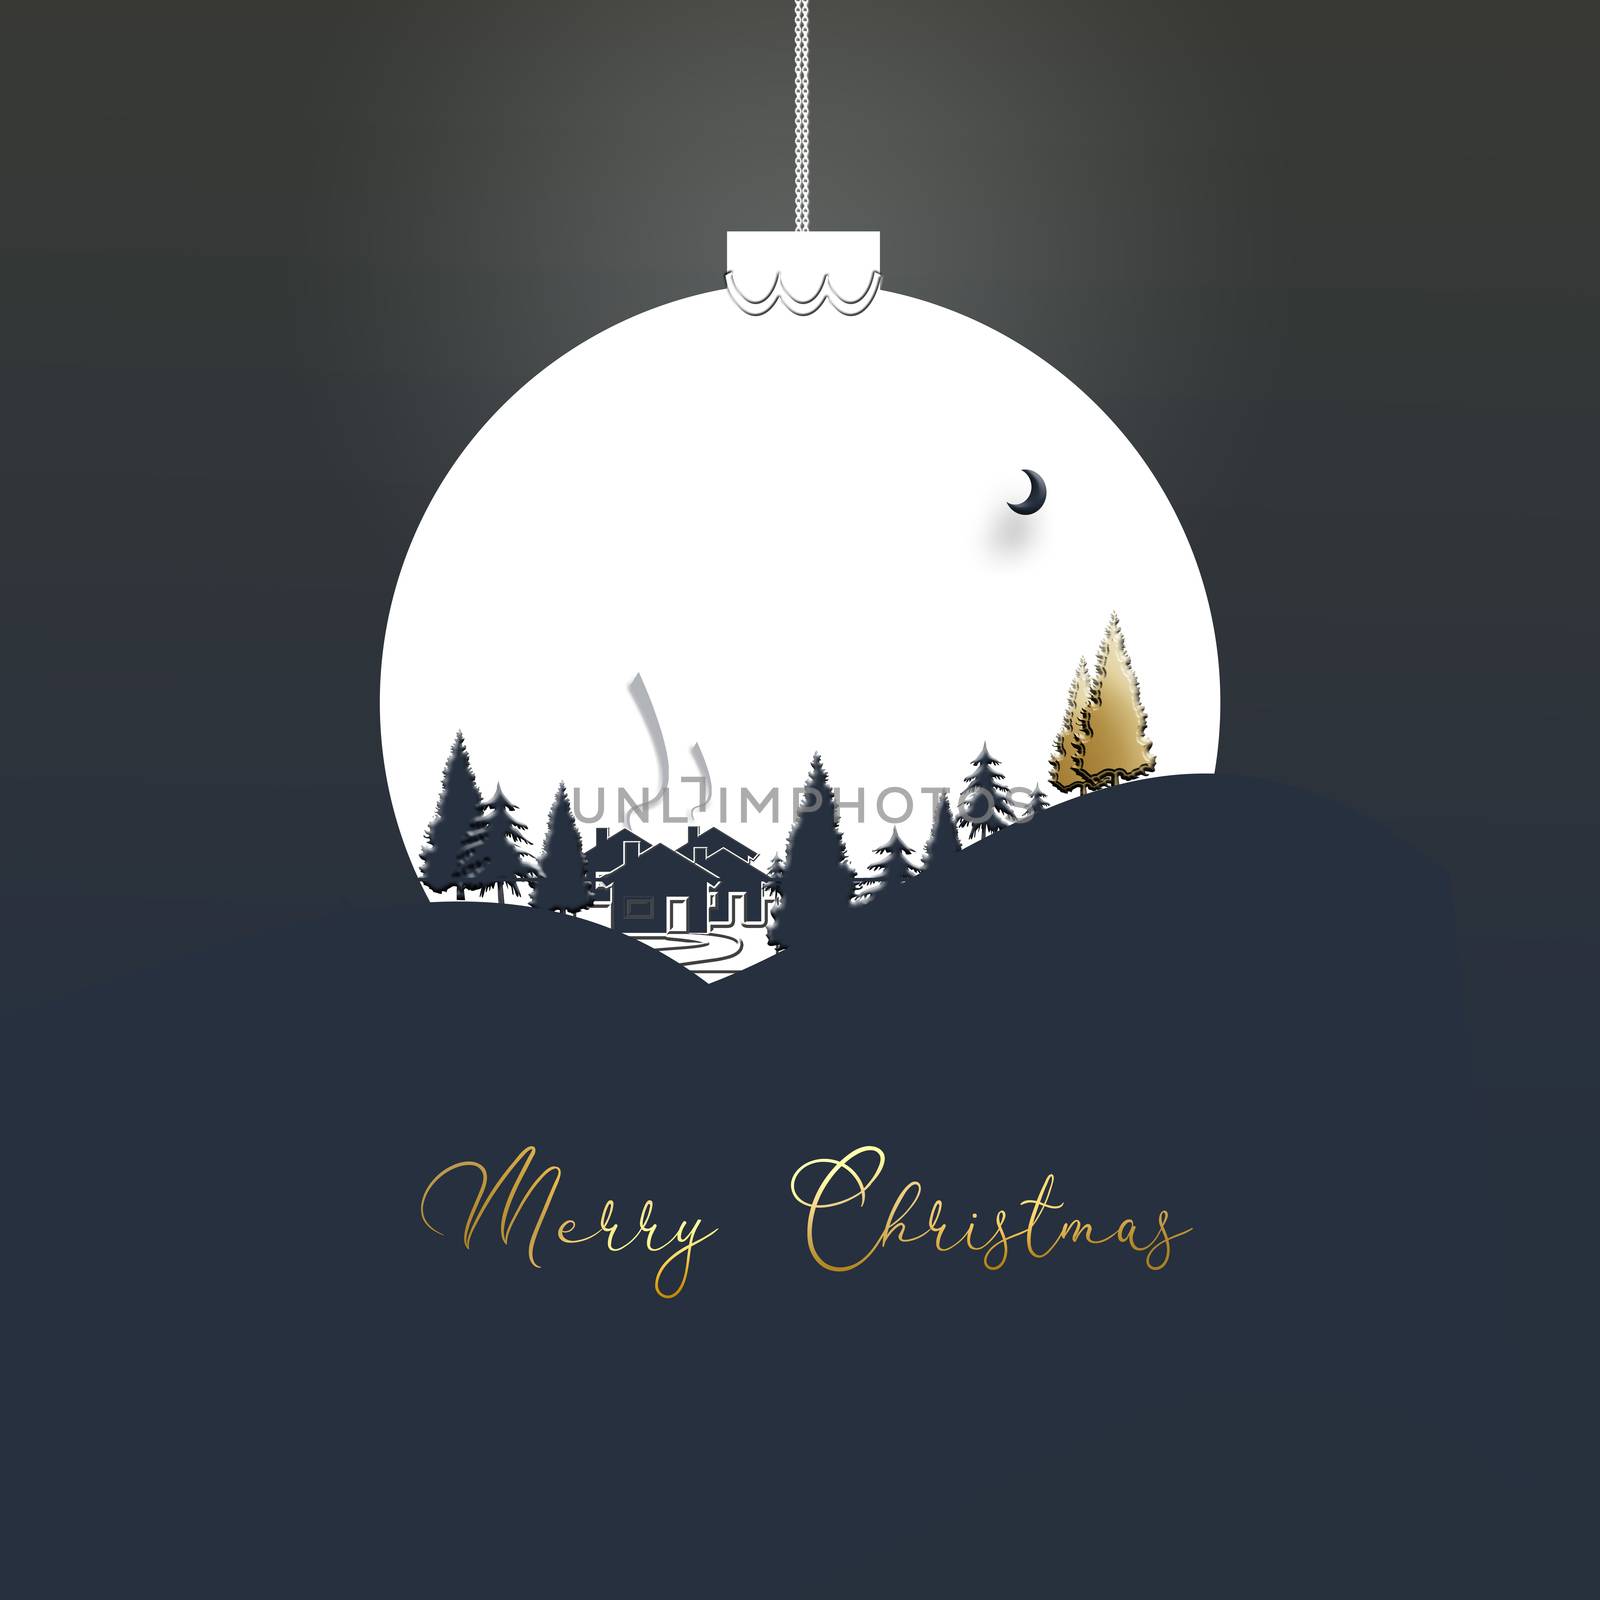 Winter landscape with houses, trees, firs in a white Christmas ball on blue background. Text Merry Christmas. 3D illustration